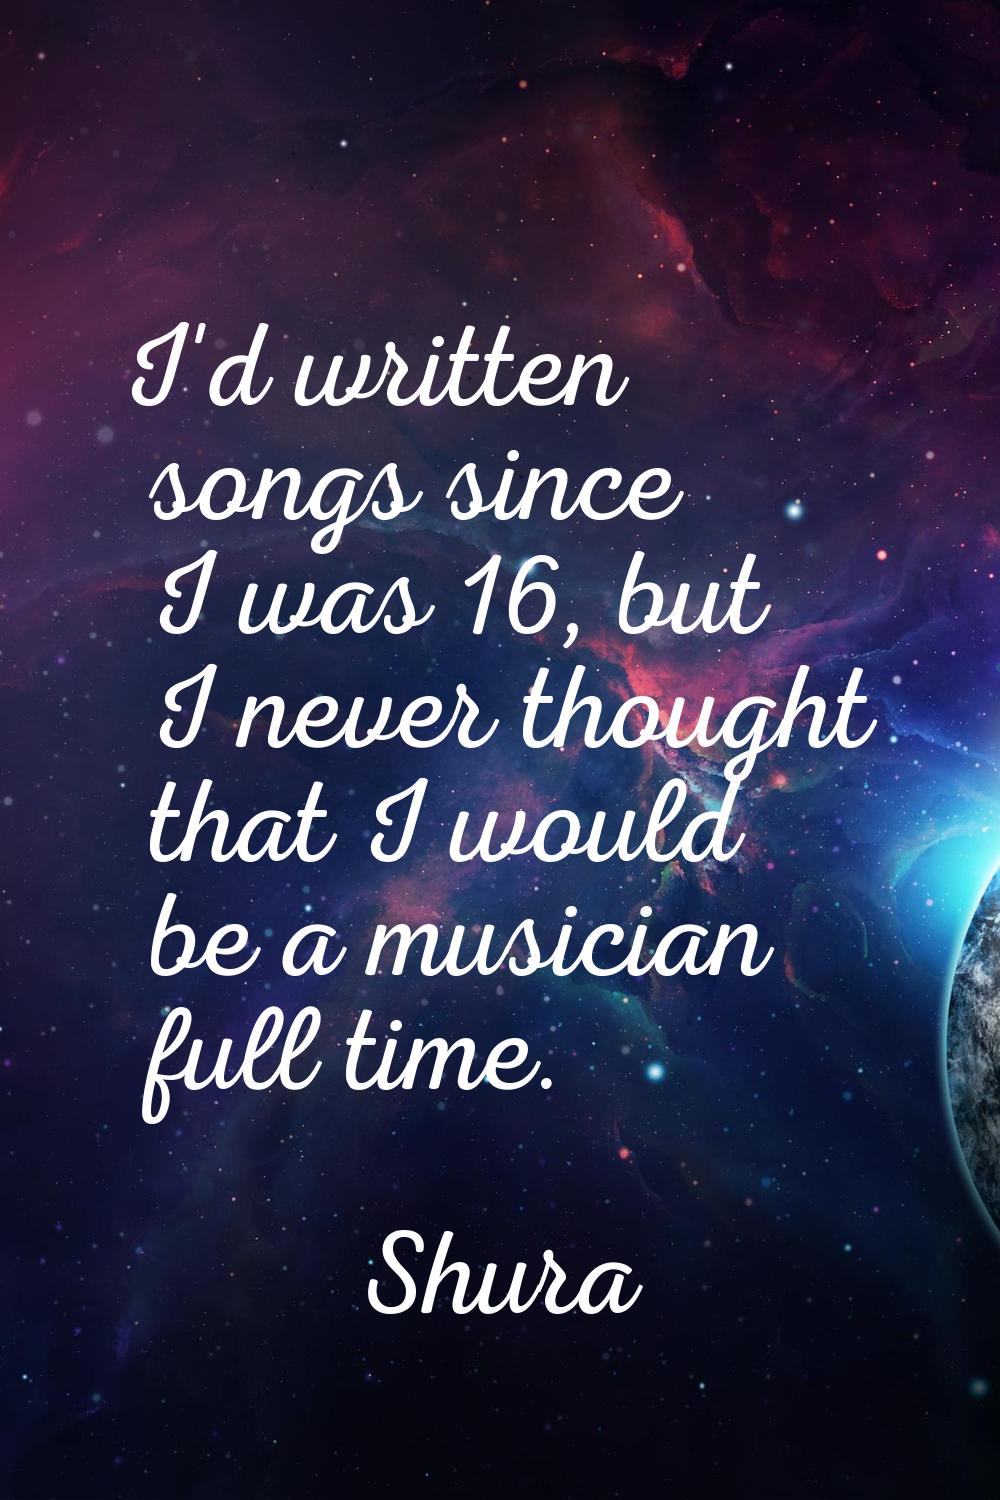 I'd written songs since I was 16, but I never thought that I would be a musician full time.